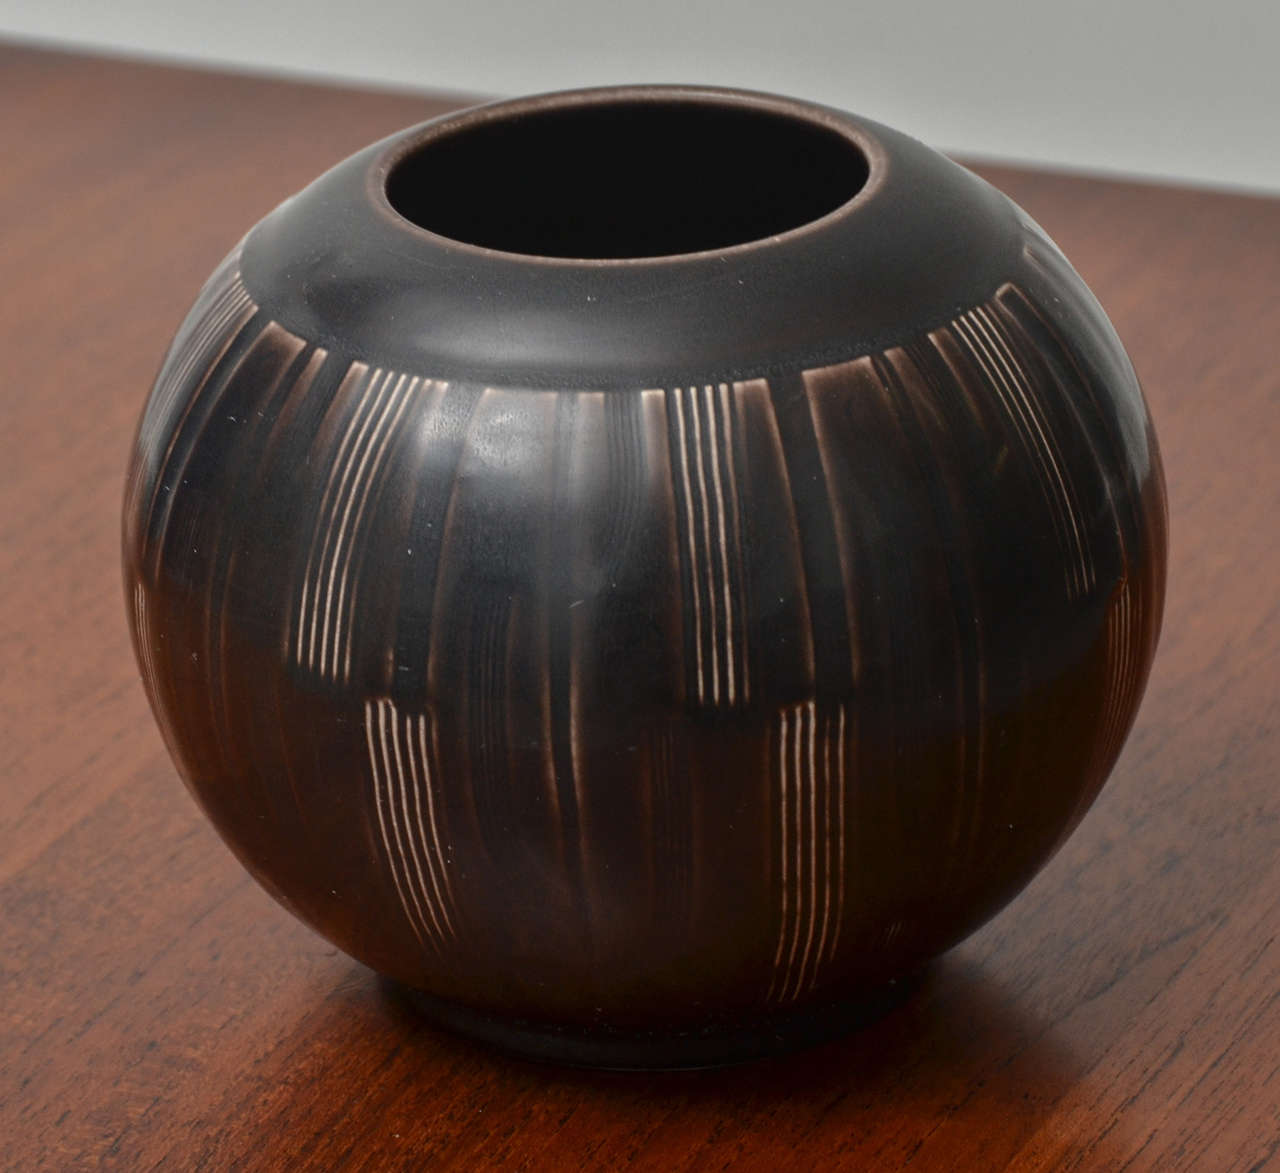 Stylish dark brown orb with Deco-like sgrafitto lines forming vertical segments
on the body of the vase.  Nils Thorsson for Aluminia, Danish, 1951.  Shape & Style began in the 1930's and remained popular in Solbjerg  pottery.